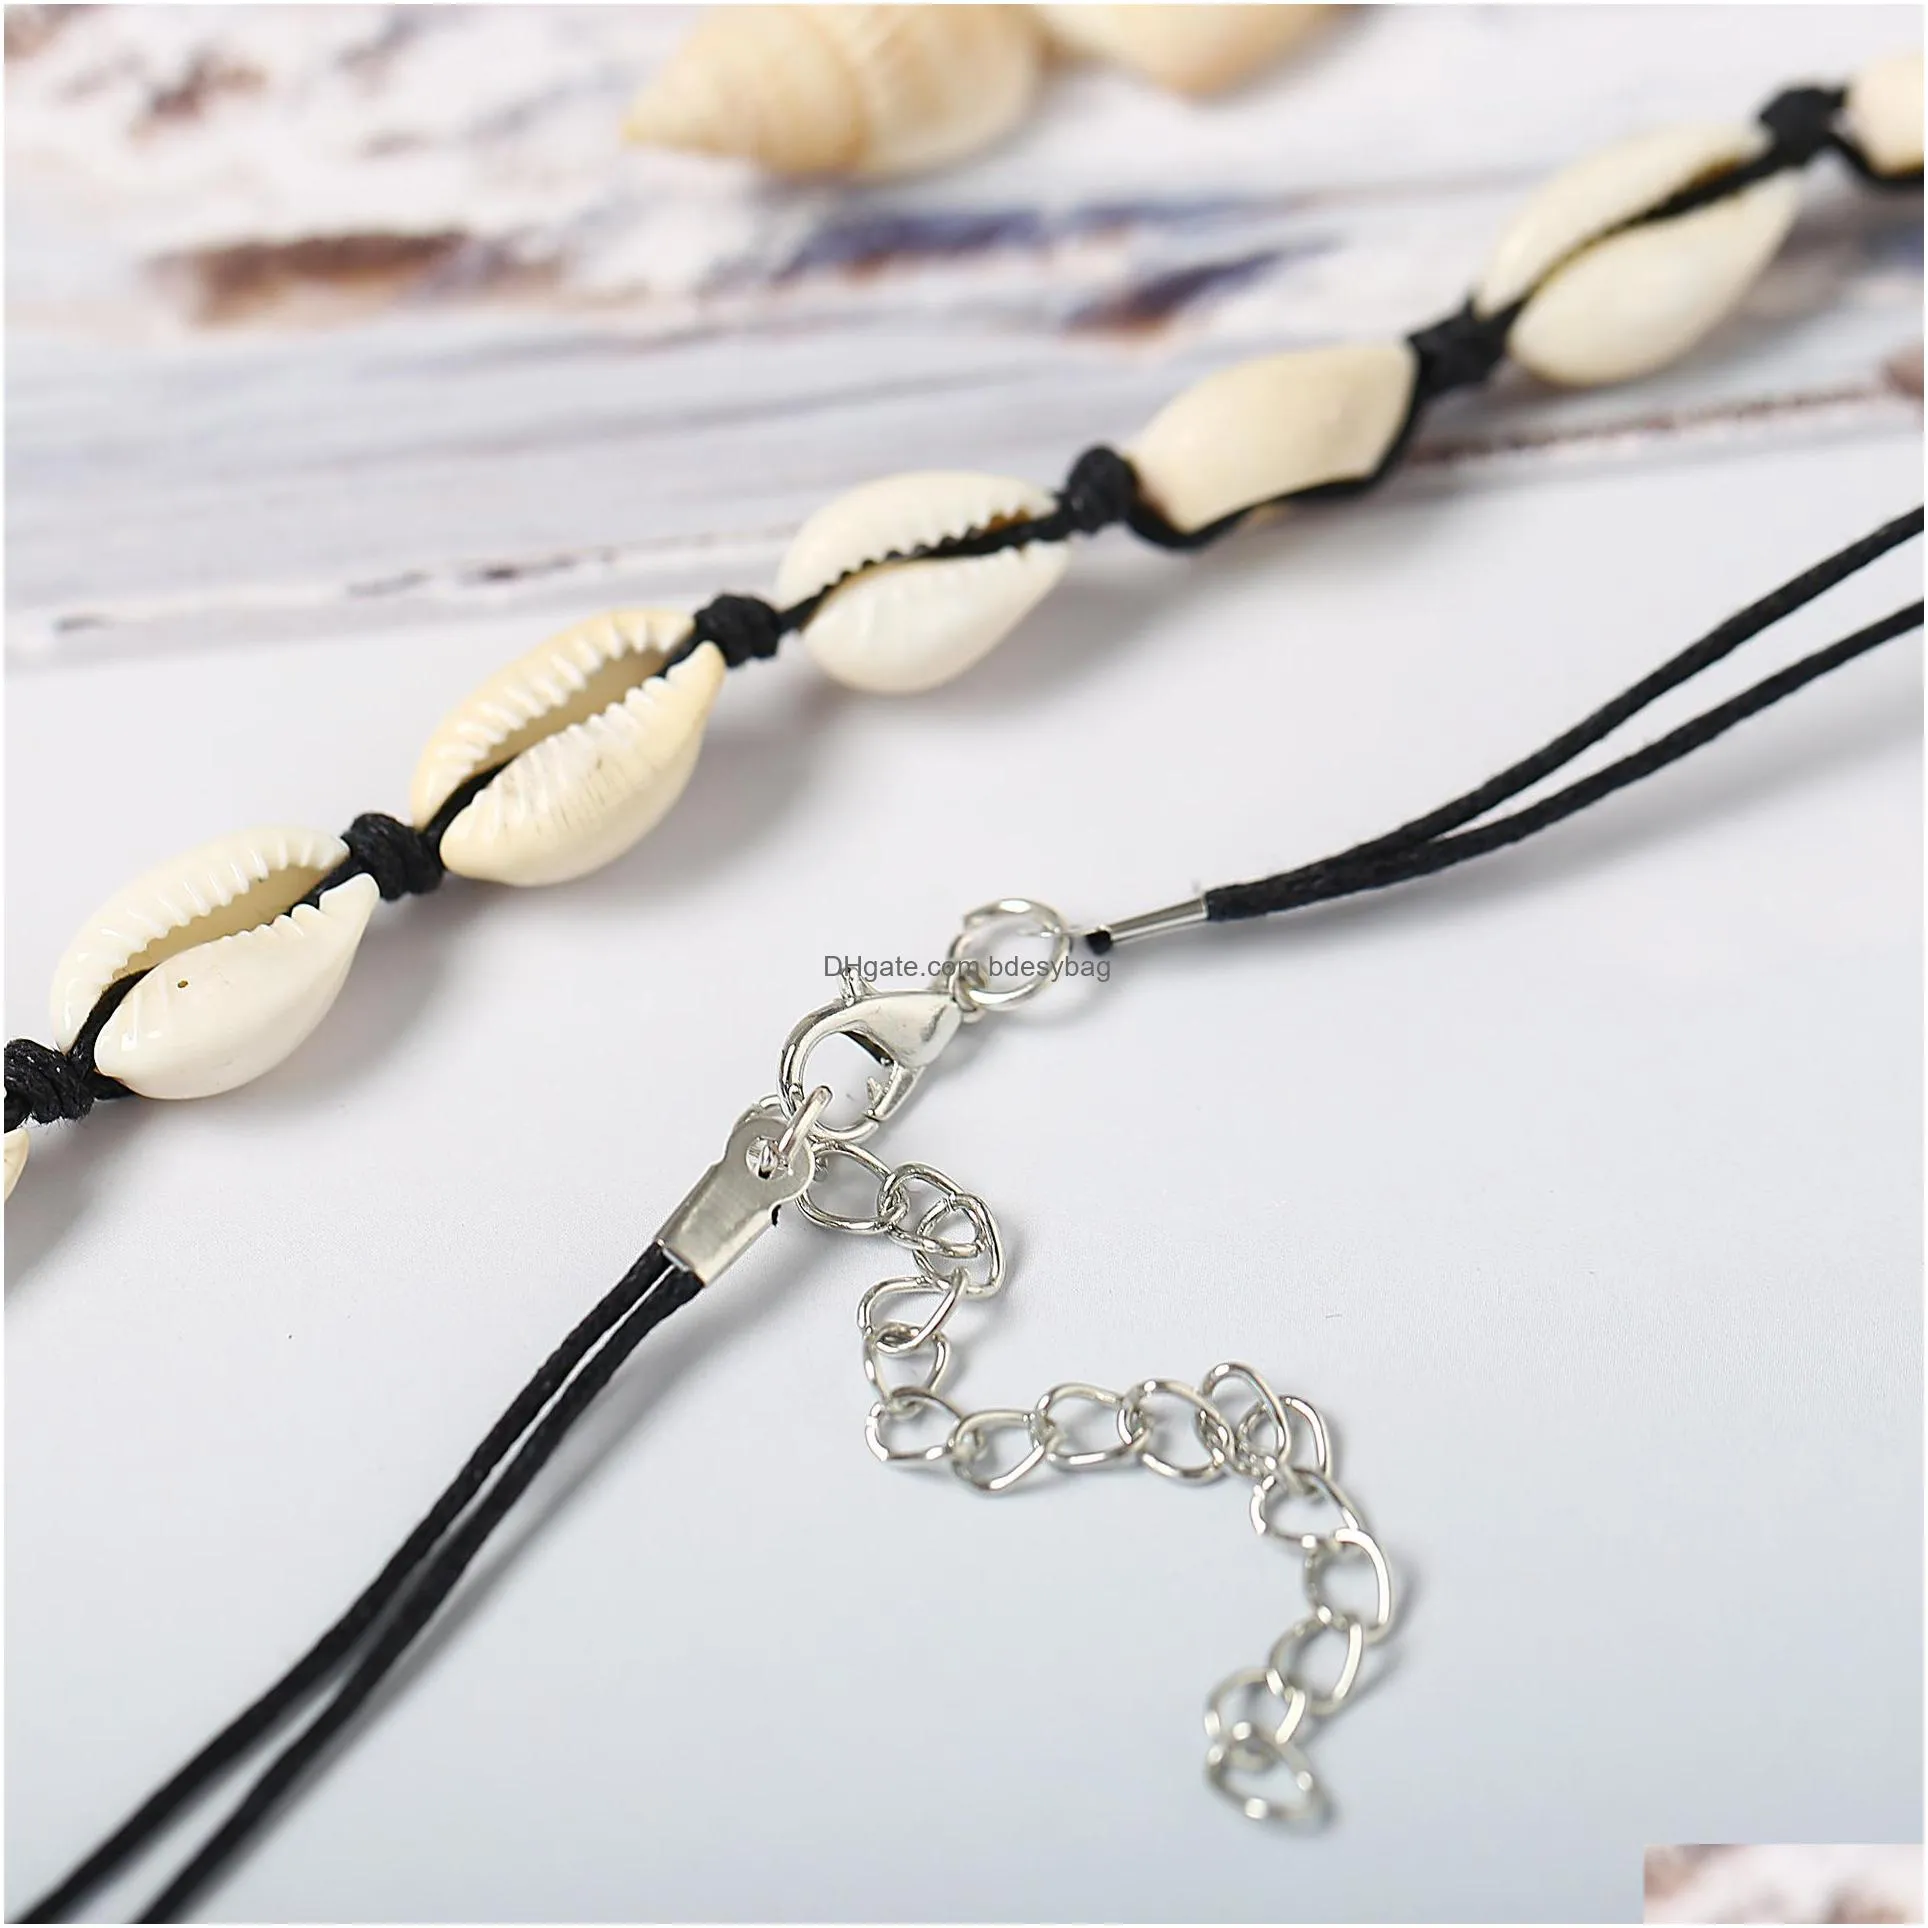 new fashion black rope chain natural seashell choker necklace collar necklace shell choker necklace for summer beach gift